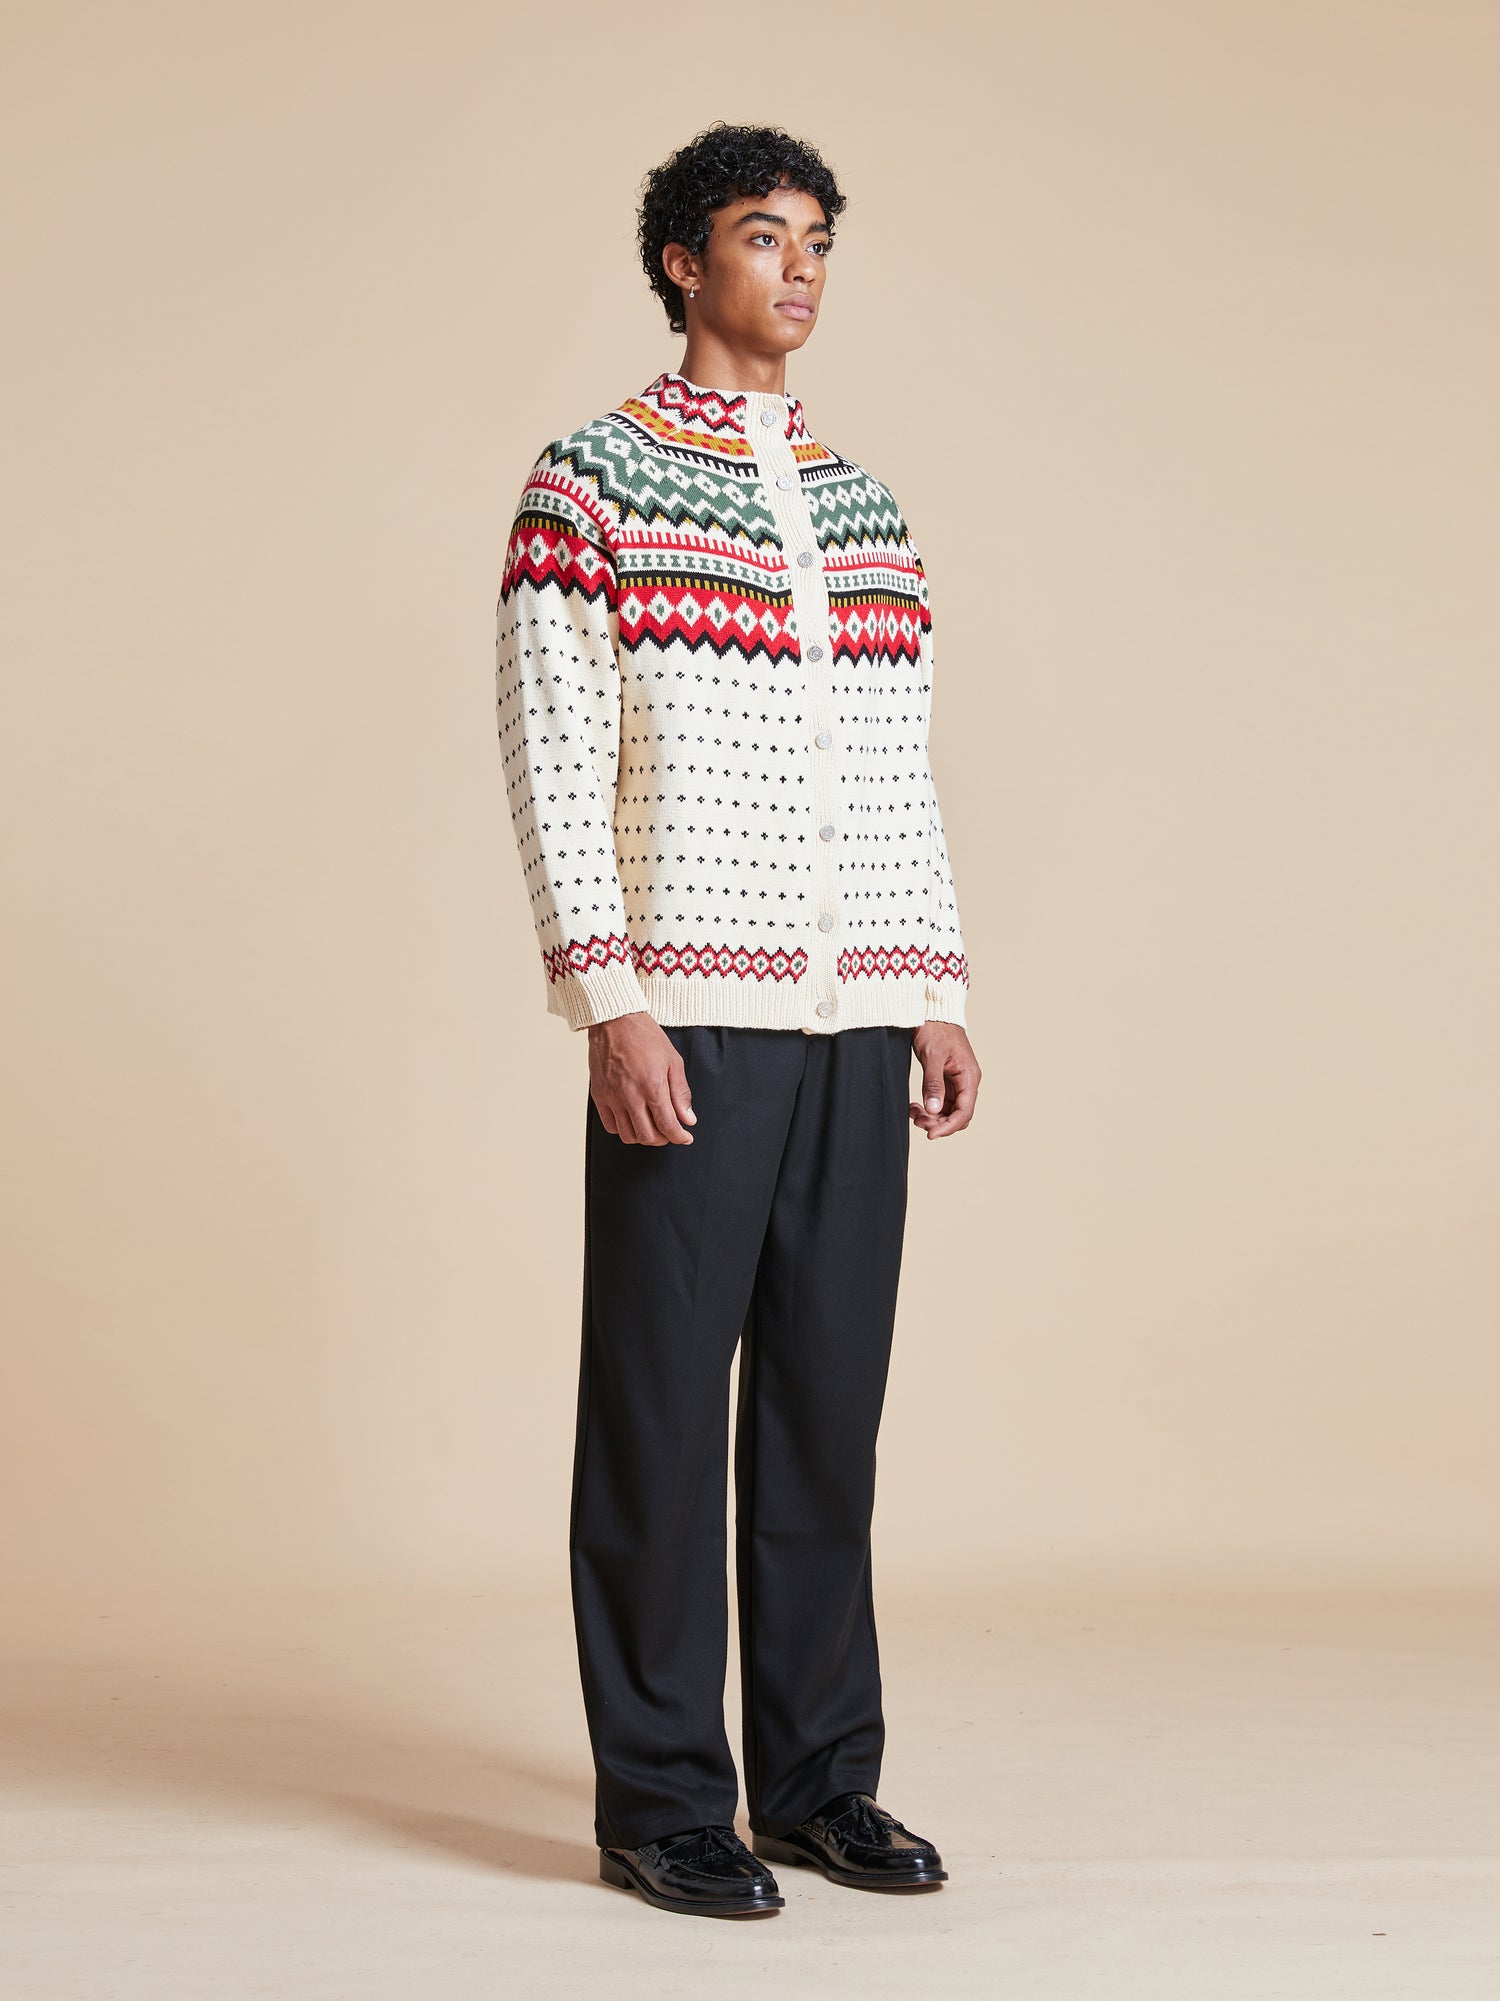 A man wearing a Harwan Isles Sweater and black pants from the Scottish Fair Isle region, made by Found.